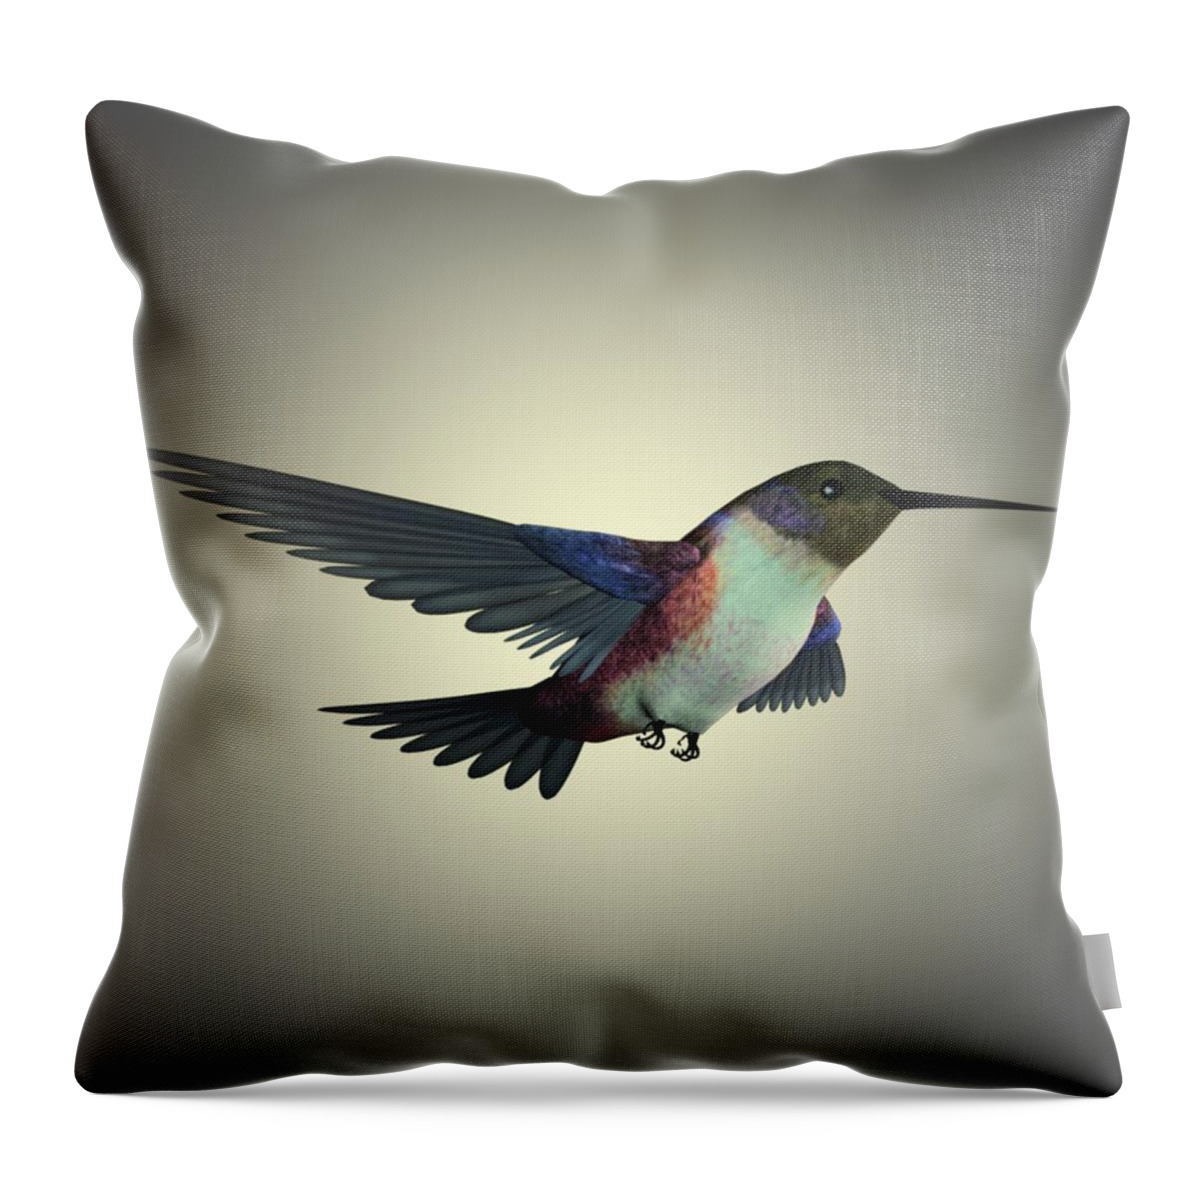 Humming Bird Throw Pillow featuring the painting Humming Bird 3 by Movie Poster Prints